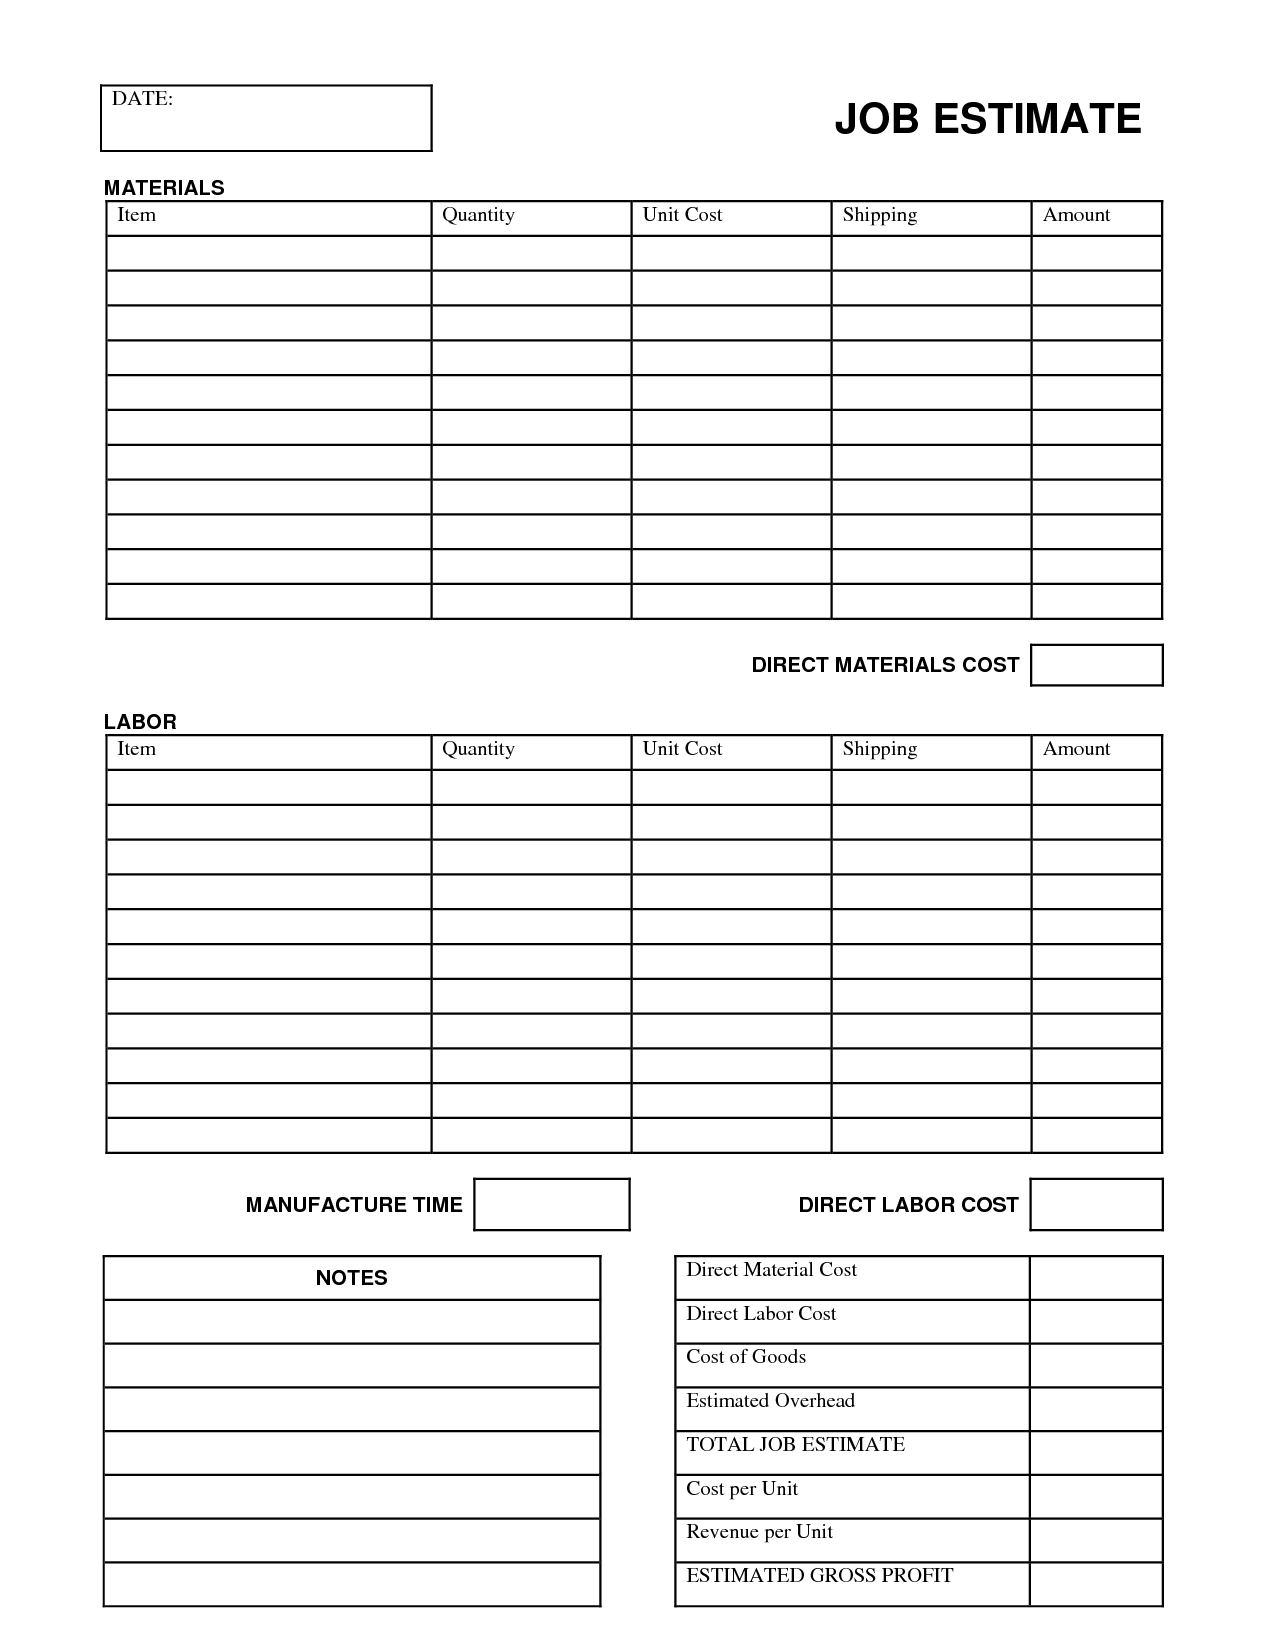 Printable Job Estimate Forms | Job Estimate Free Office Form Within Construction Cost Report Template